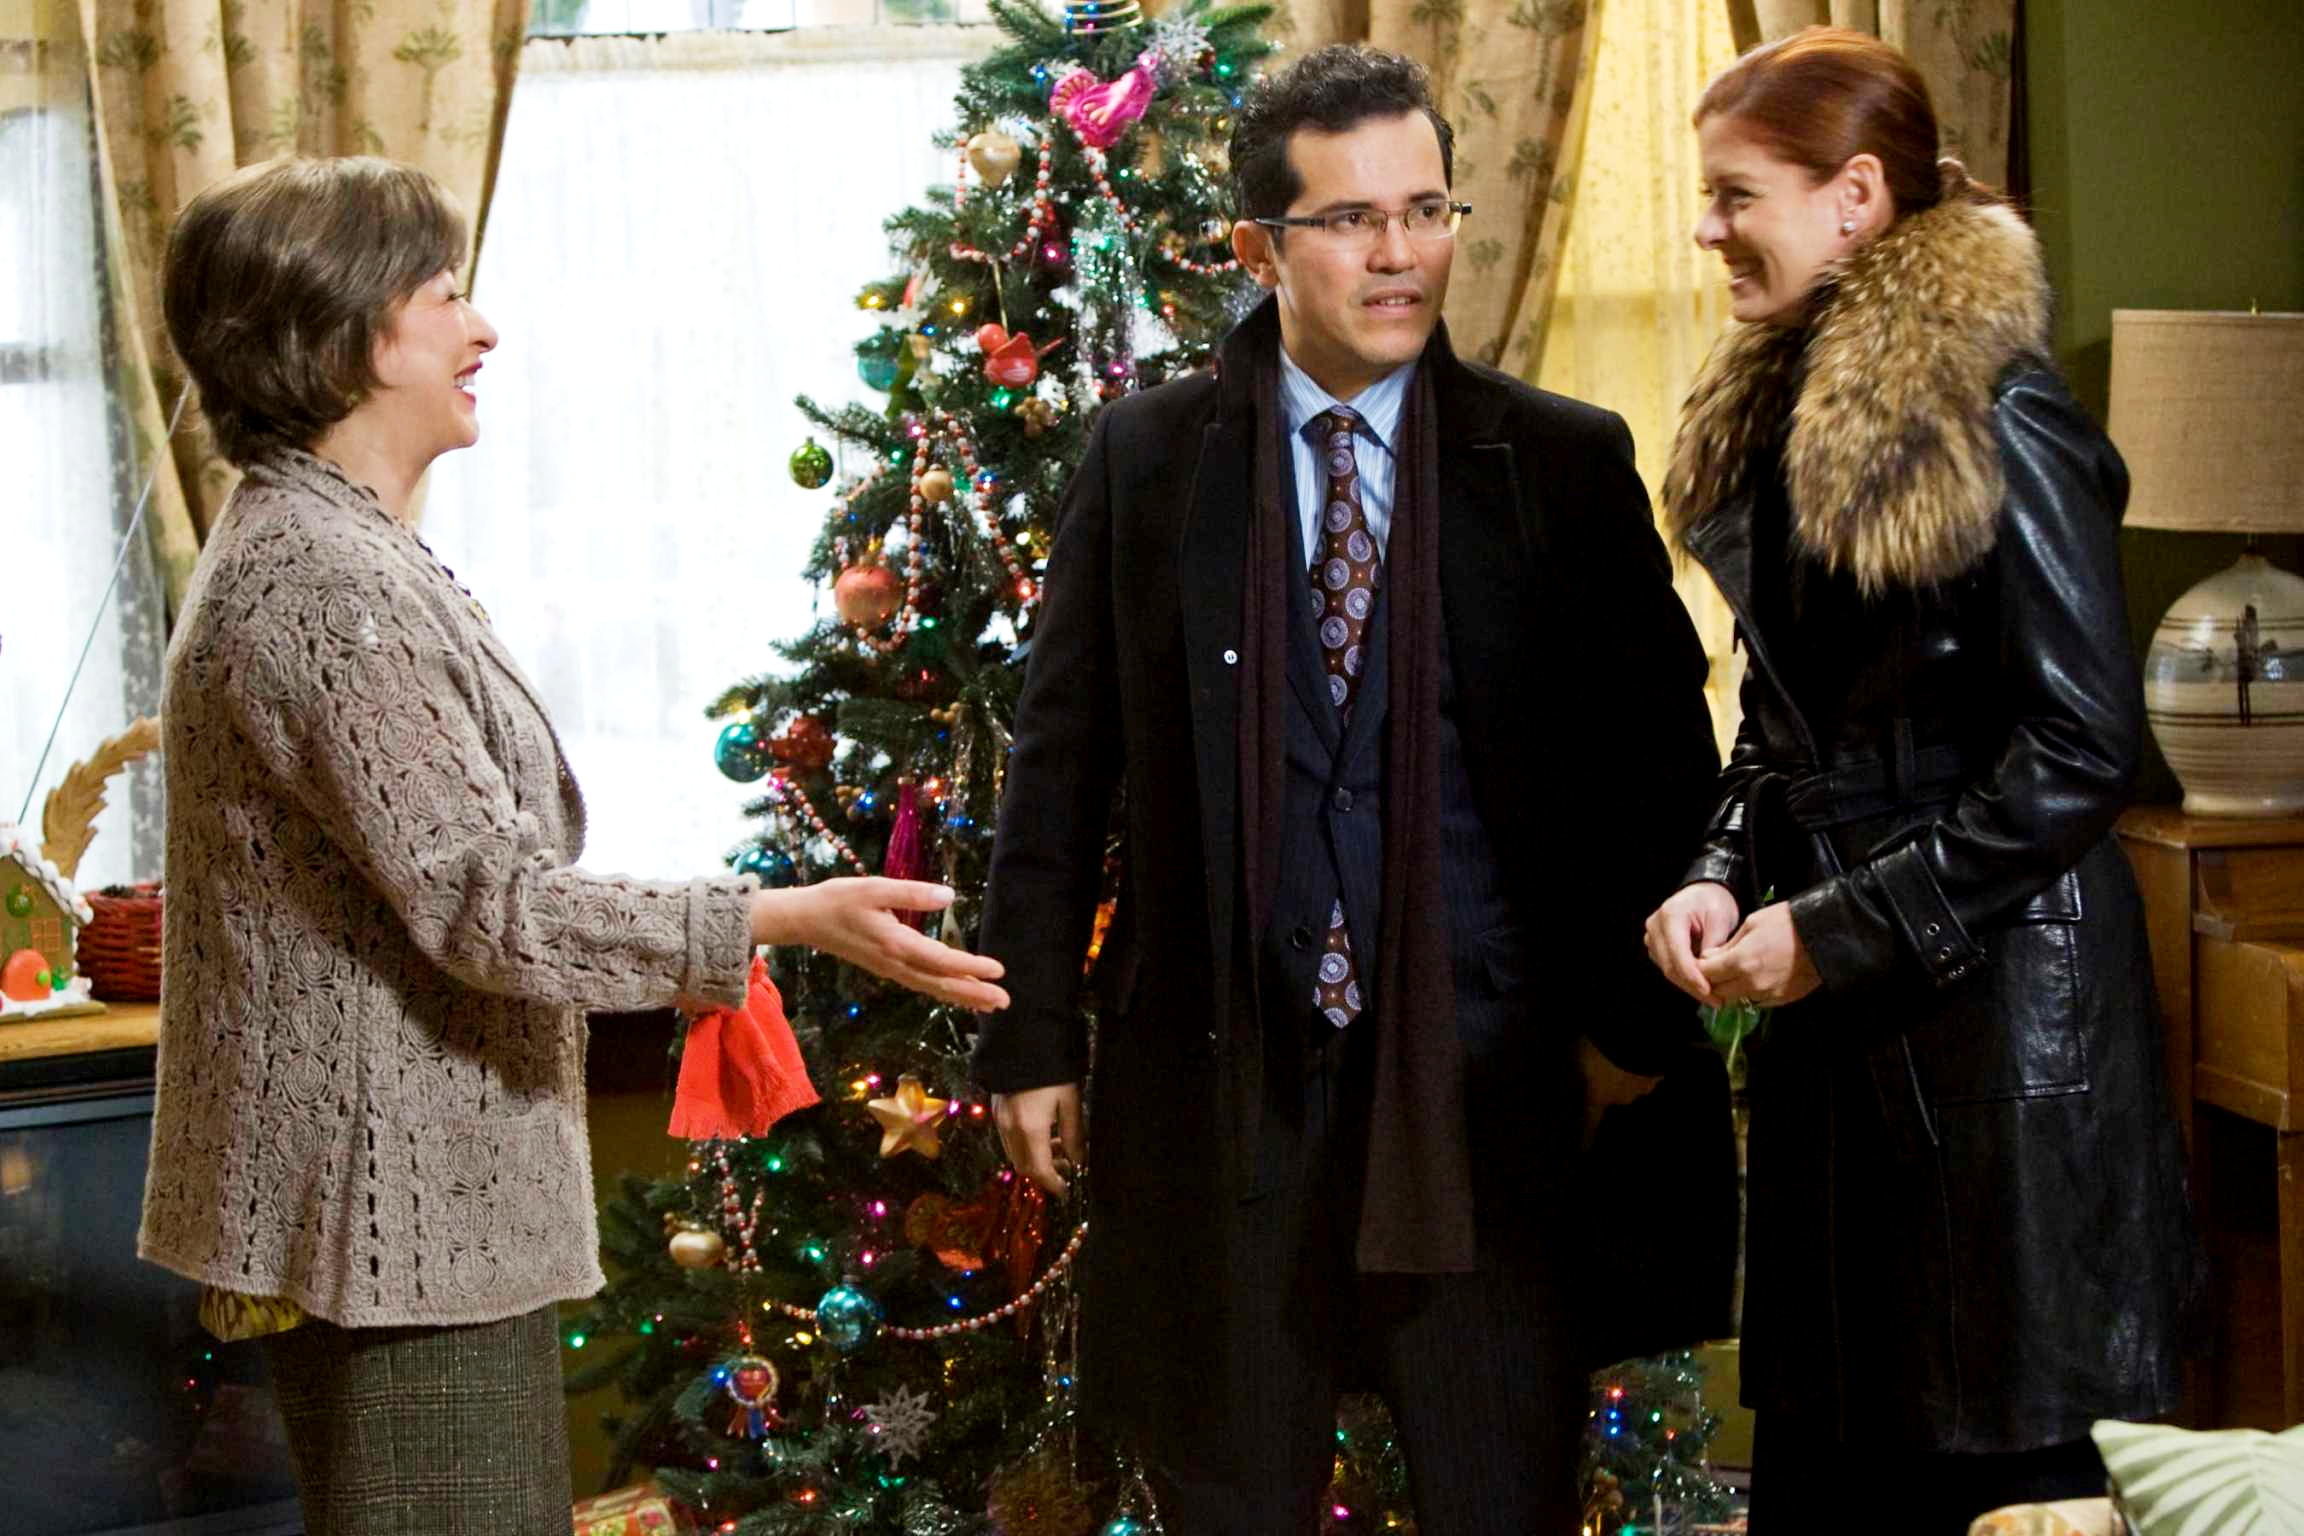 Elizabeth Pena, John Leguizamo and Debra Messing in Overture Films' Nothing Like the Holidays (2008). Photo credit by Chuck Hodes.